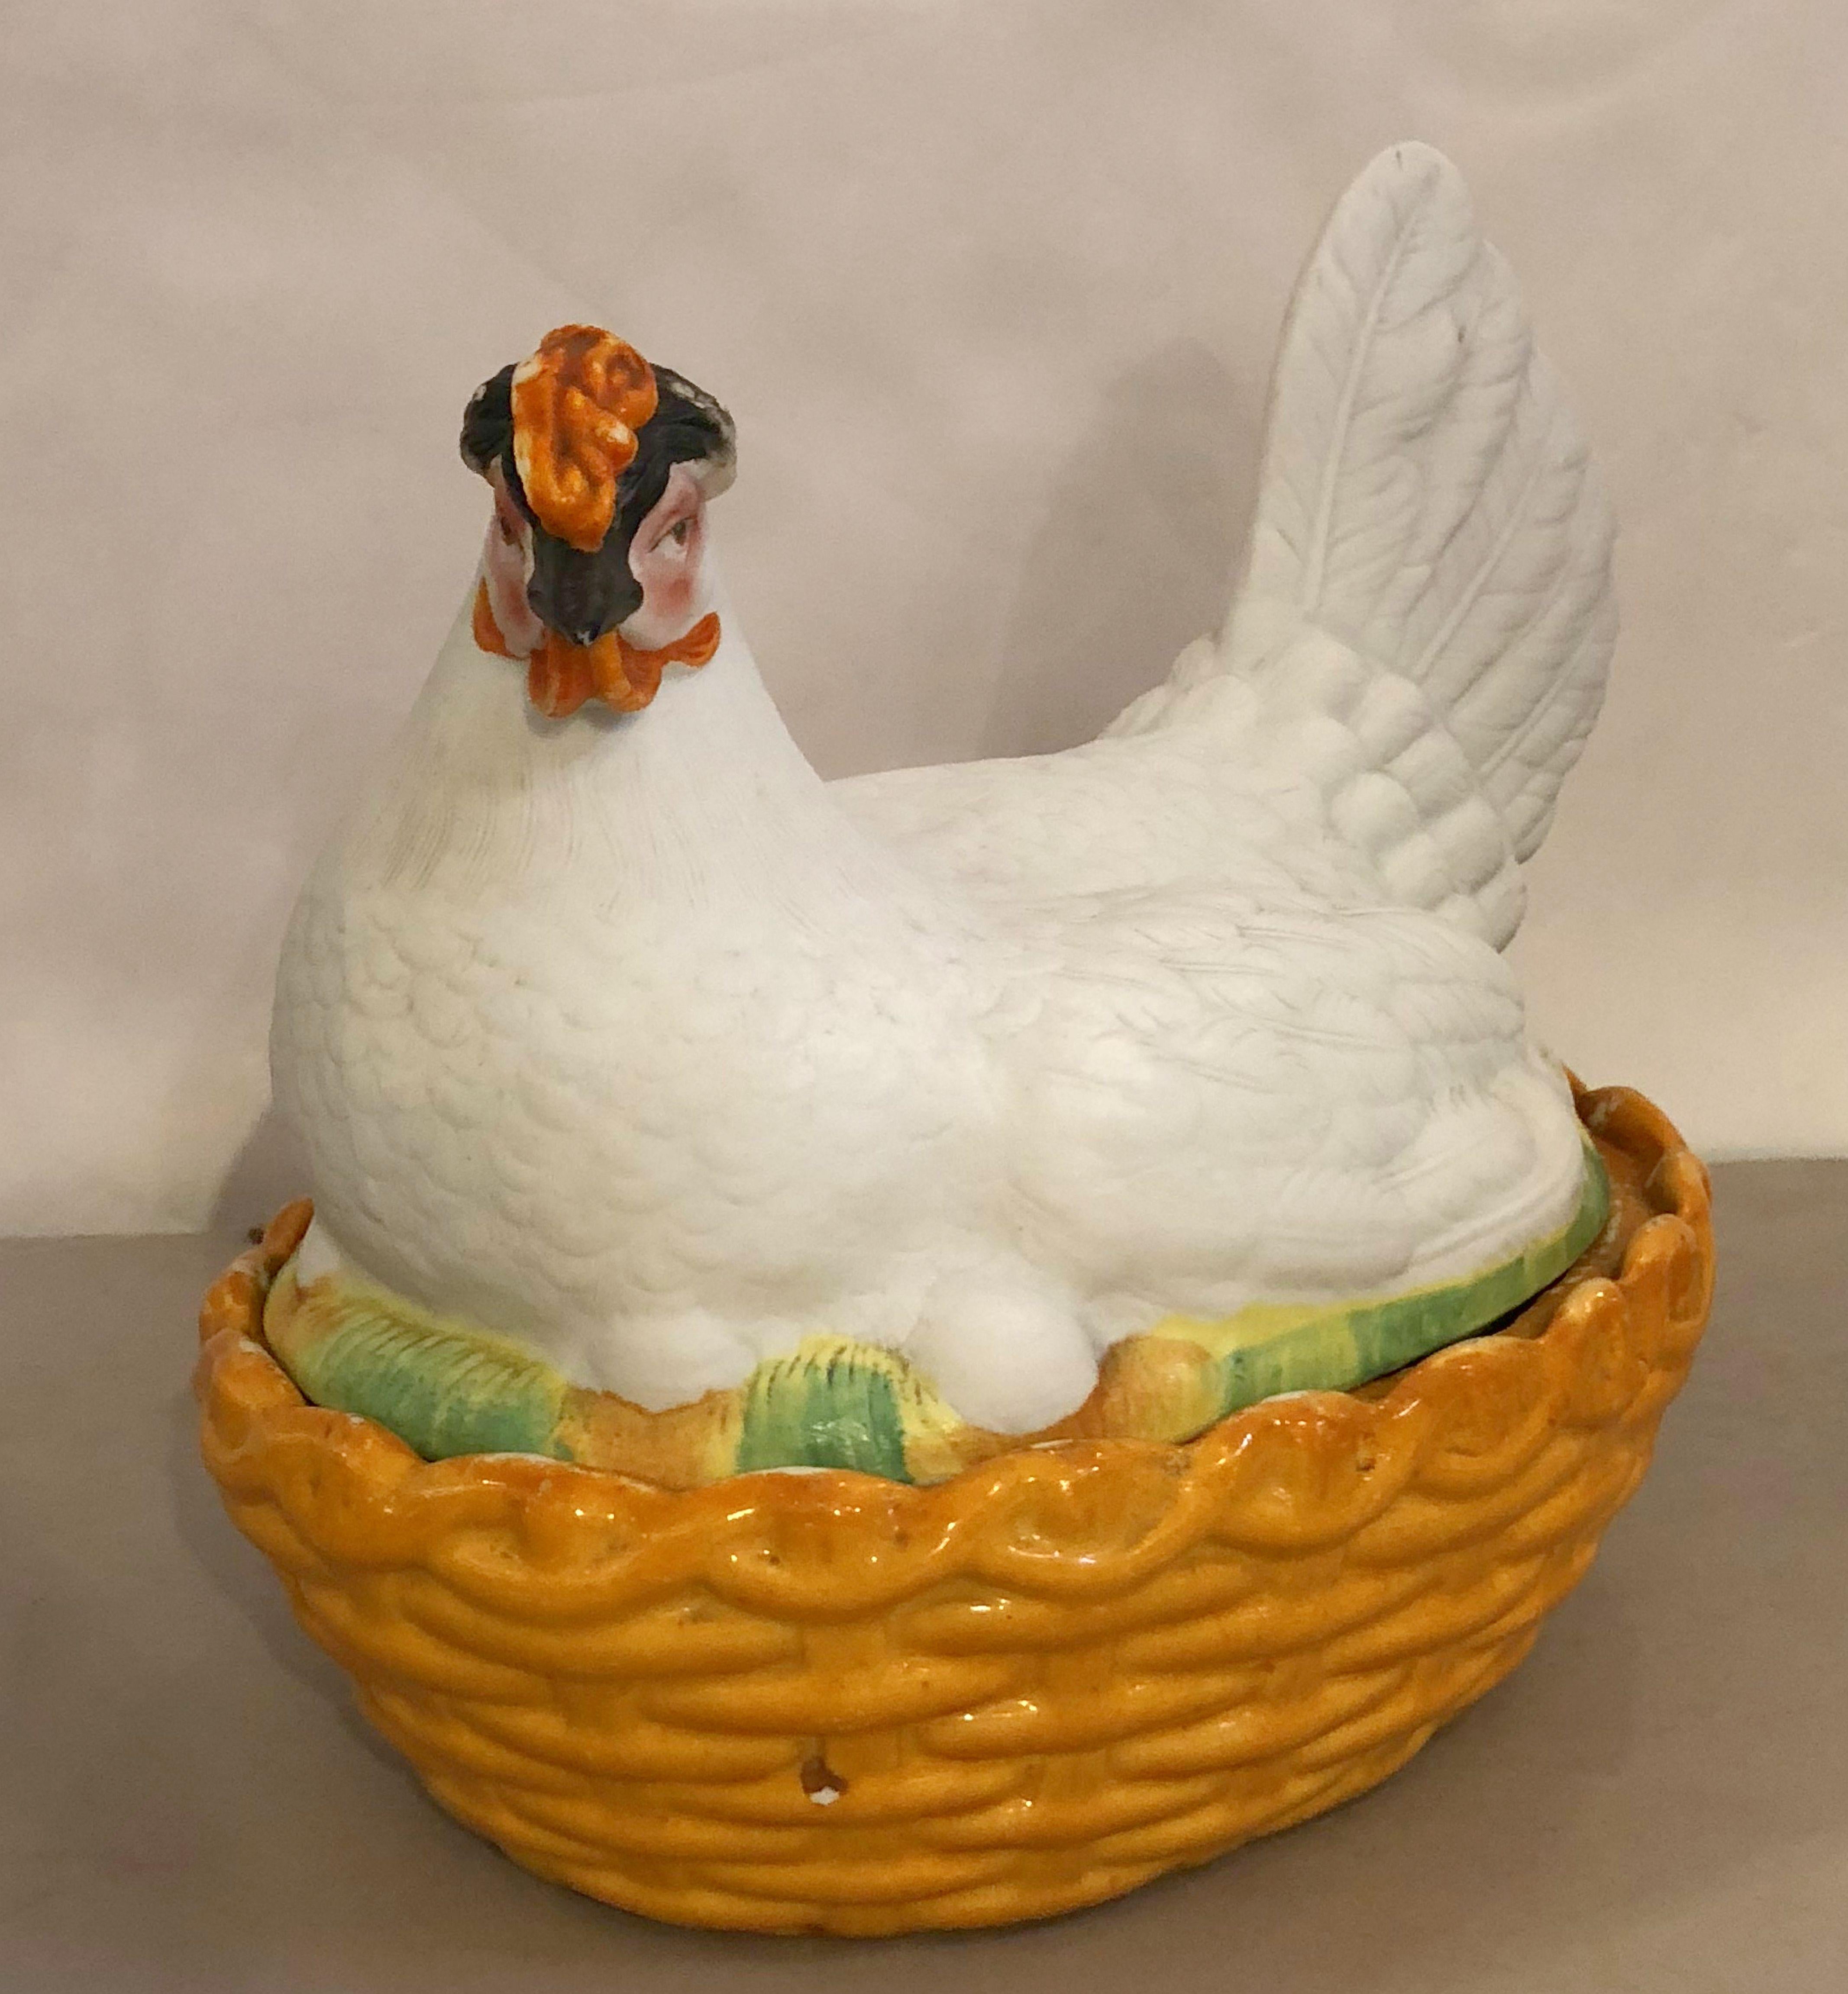 A fine 19th century English hen on nest tureen from the Staffordshire Potteries, featuring a lid in the form of a chicken hen with eggs with a fitted base stylized as a woven basket.